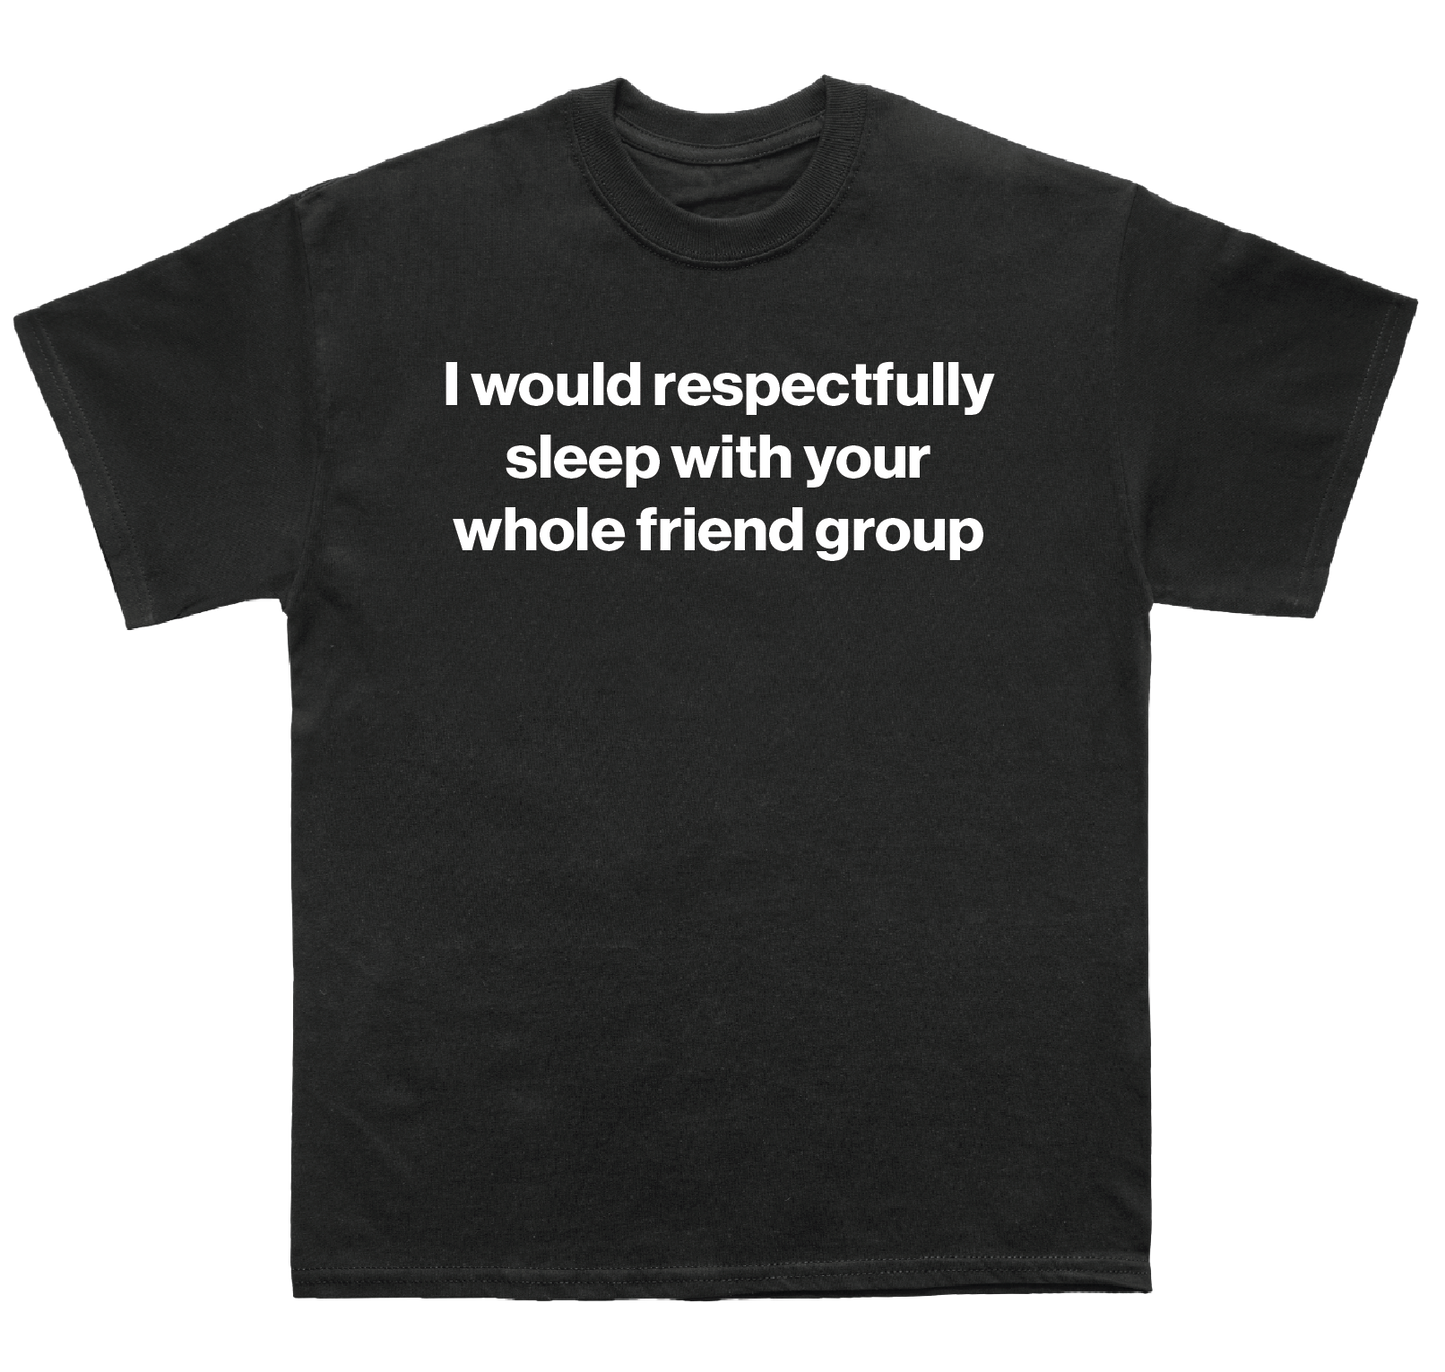 I would respectfully sleep with your whole friend group shirt